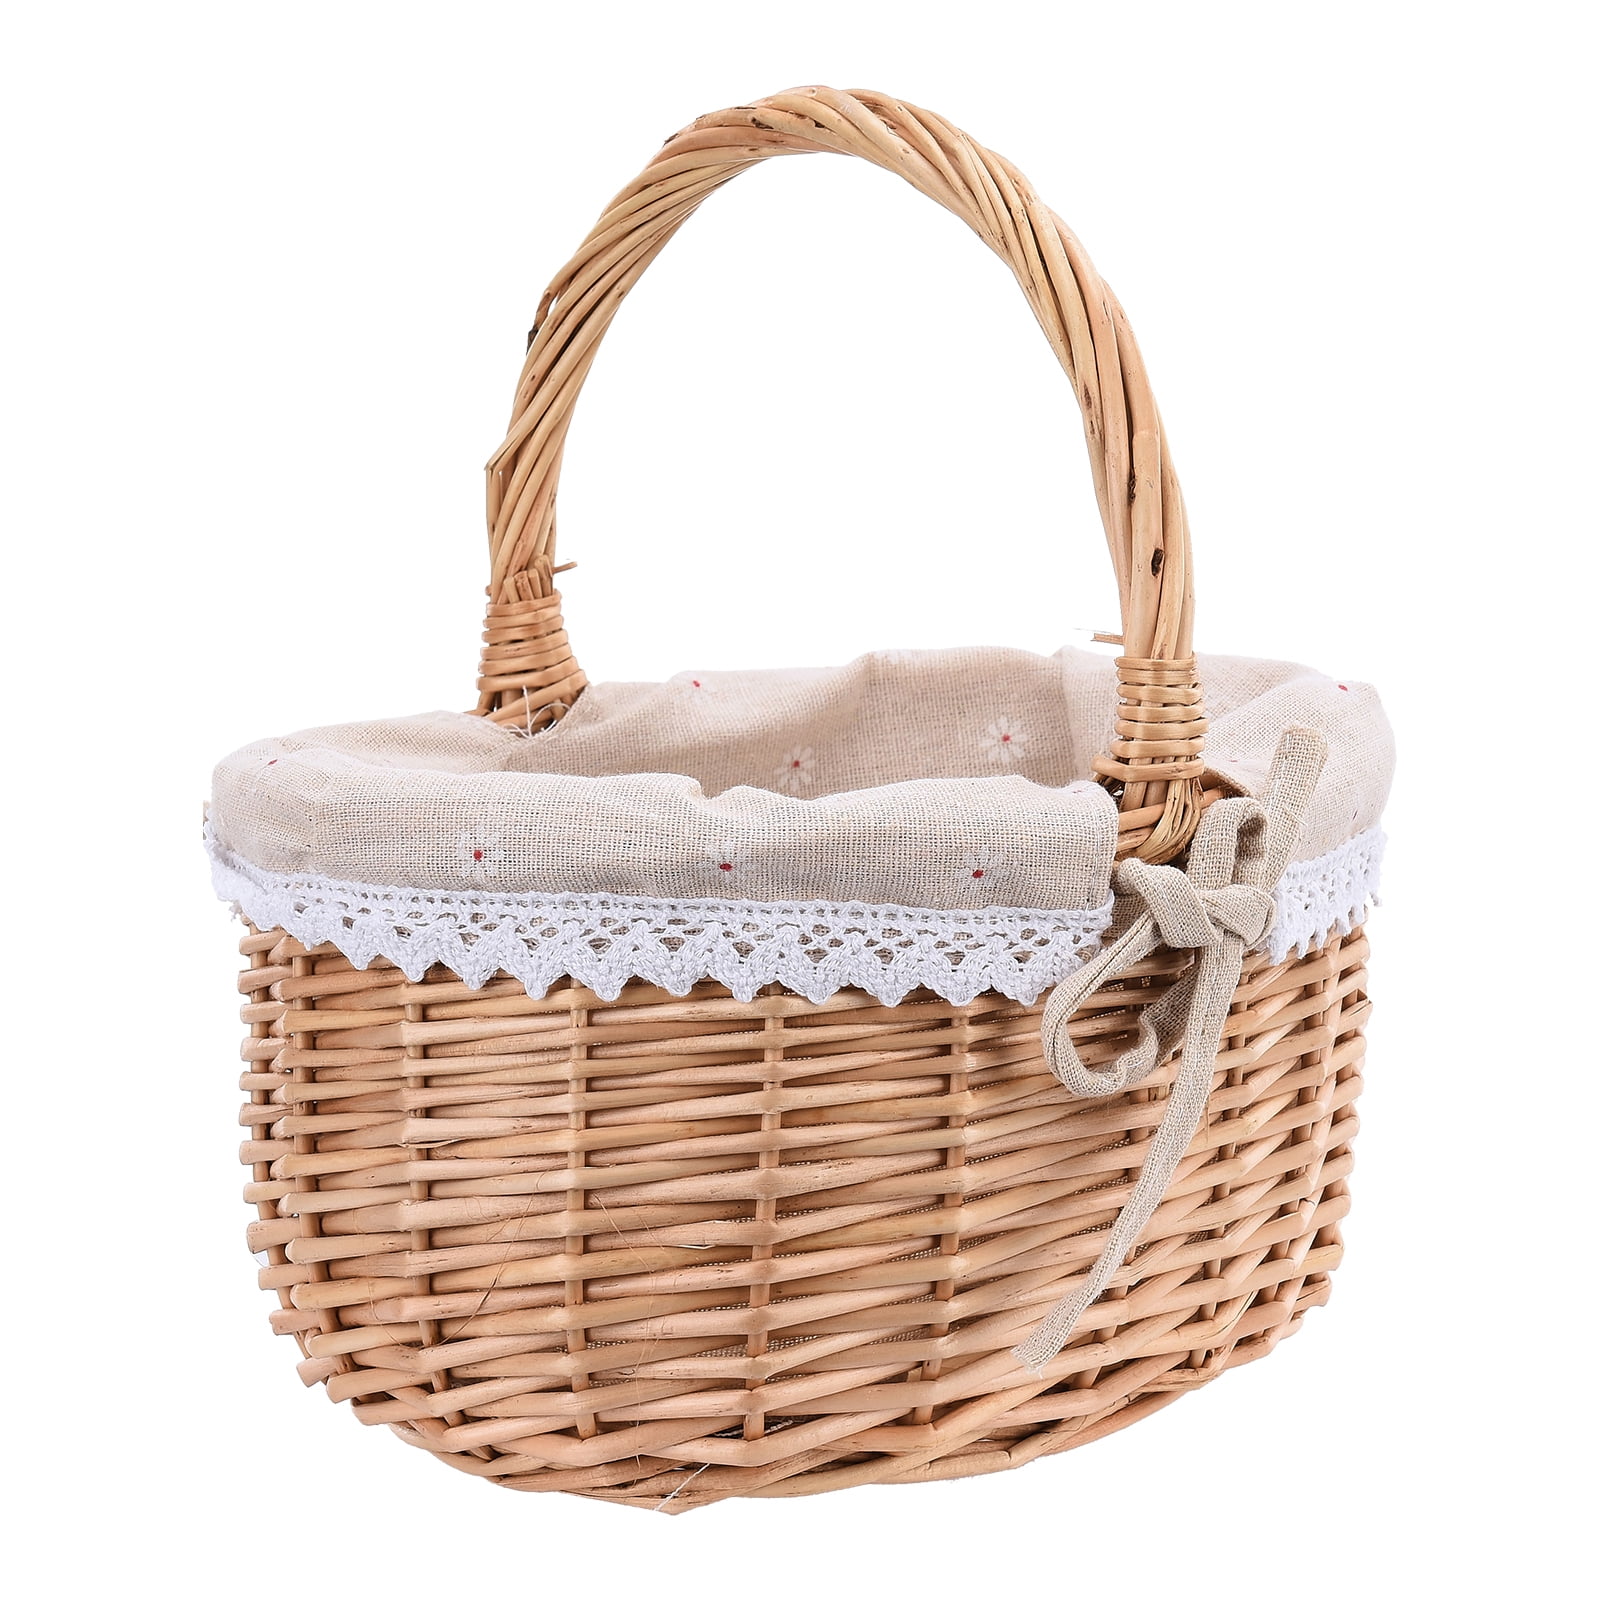 WICKER WILLOW STORAGE BASKETS LINING EASTER GIFT MAKE YOUR OWN HAMPER LARGE 